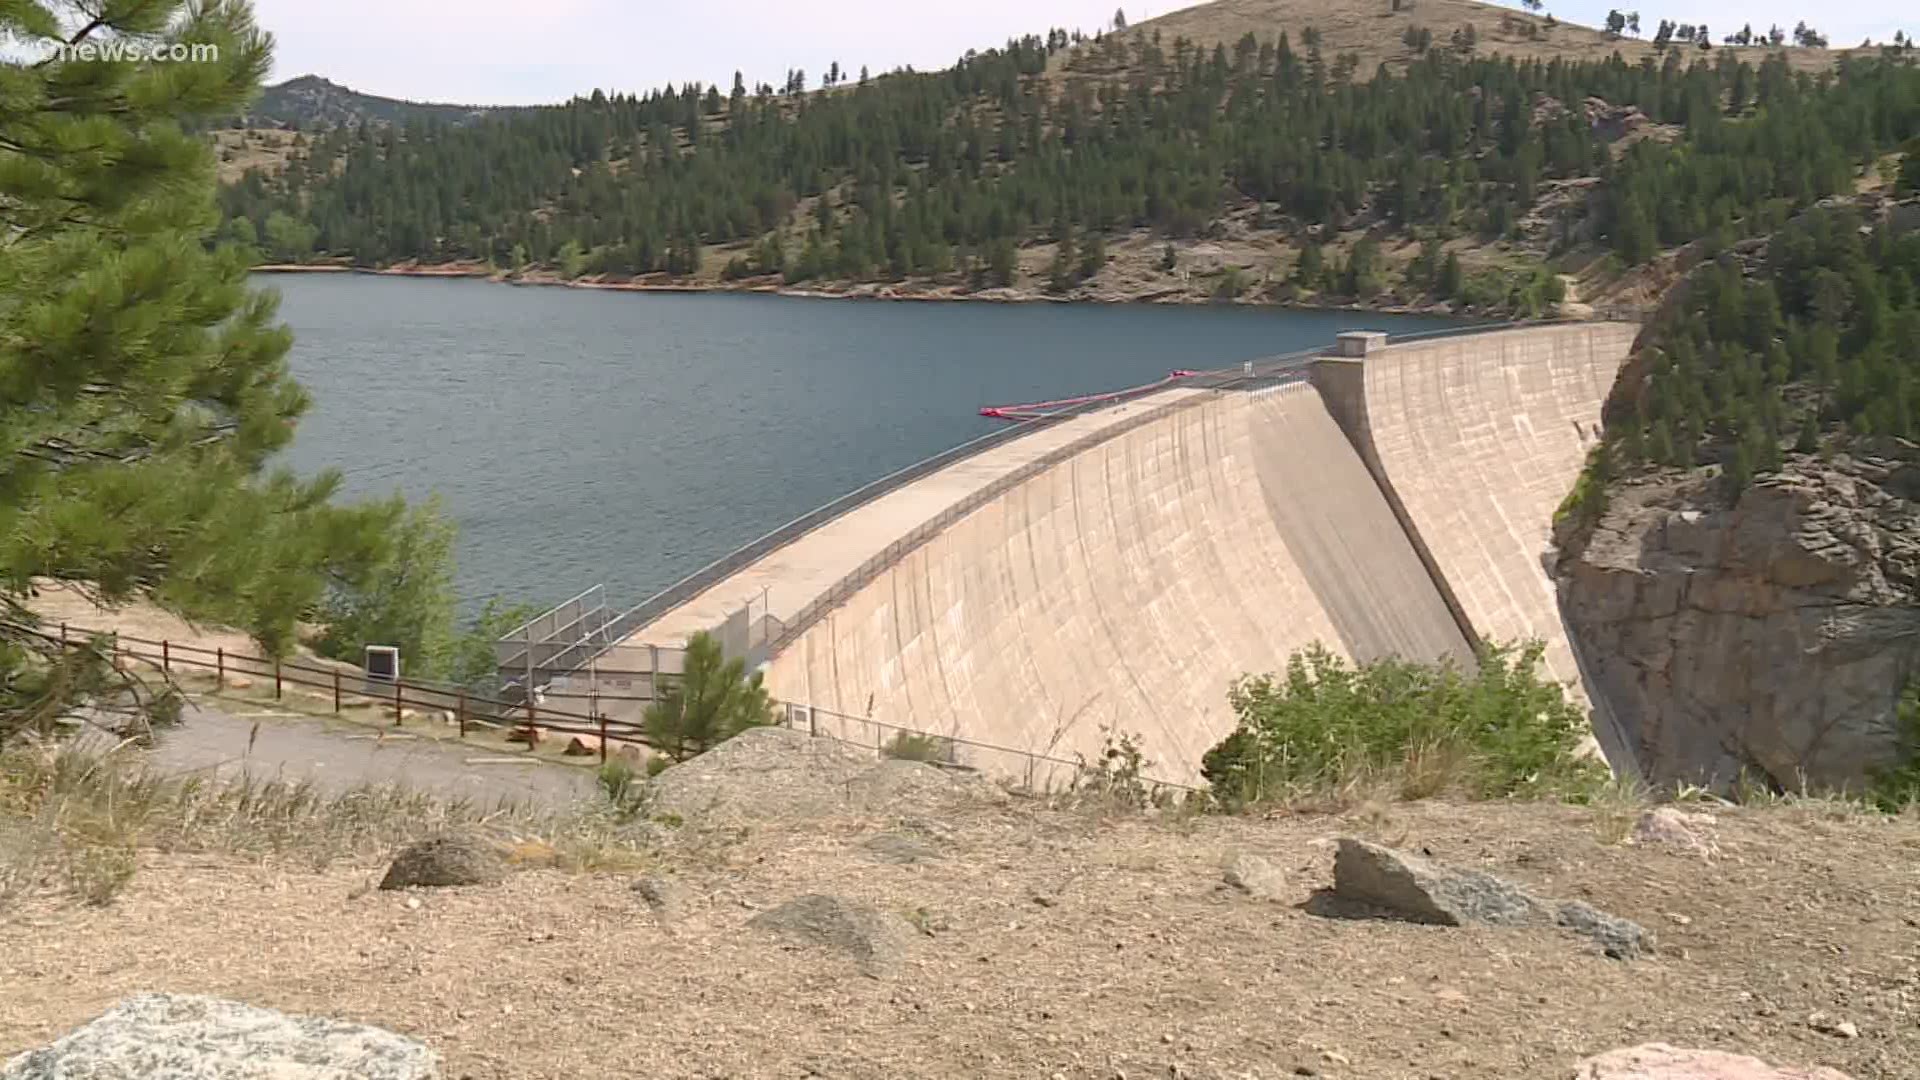 Denver Water says the project is necessary as Denver's population grows, and also because of the unpredictability of climate change.